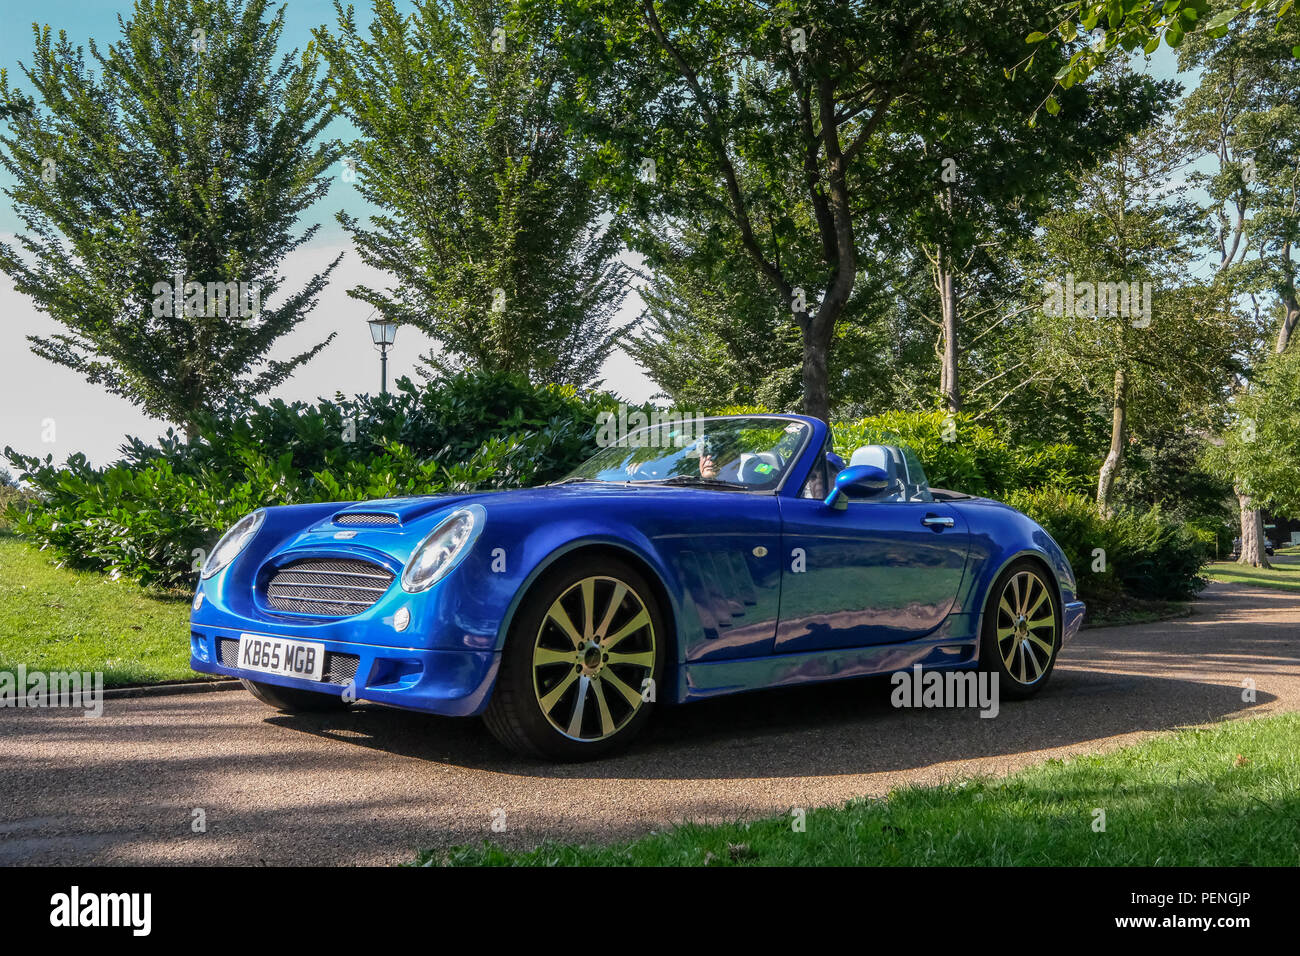 The Healy Enigma sports car Stock Photo